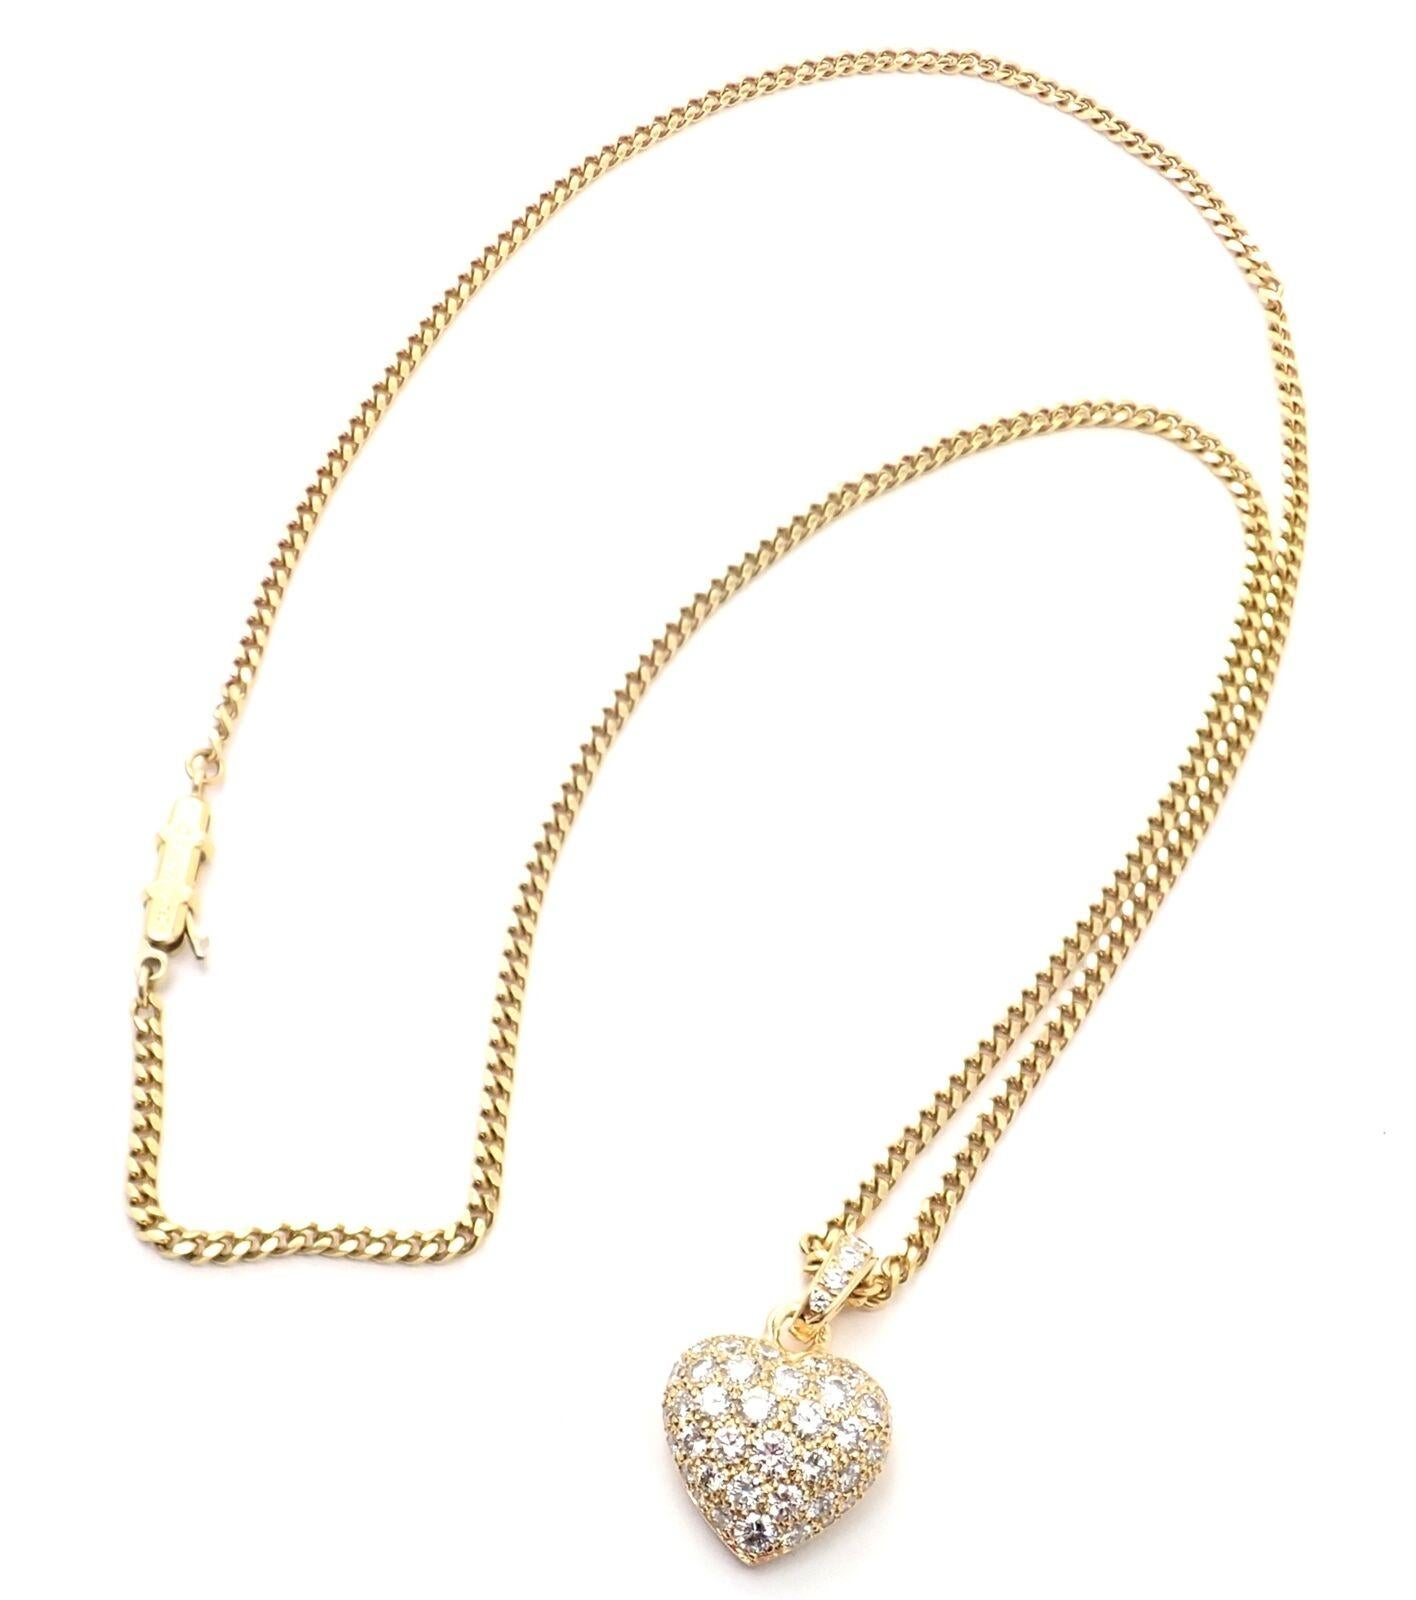 18k Yellow Gold Diamond Pave Heart Pendant Necklace by Cartier.
With Round brilliant cut diamonds VS1 clarity E color total weight approx. 2ct
Details:
Weight: 11 grams
Pendant Size: 21mm x 14mm
Width: 2mm
Length: 17